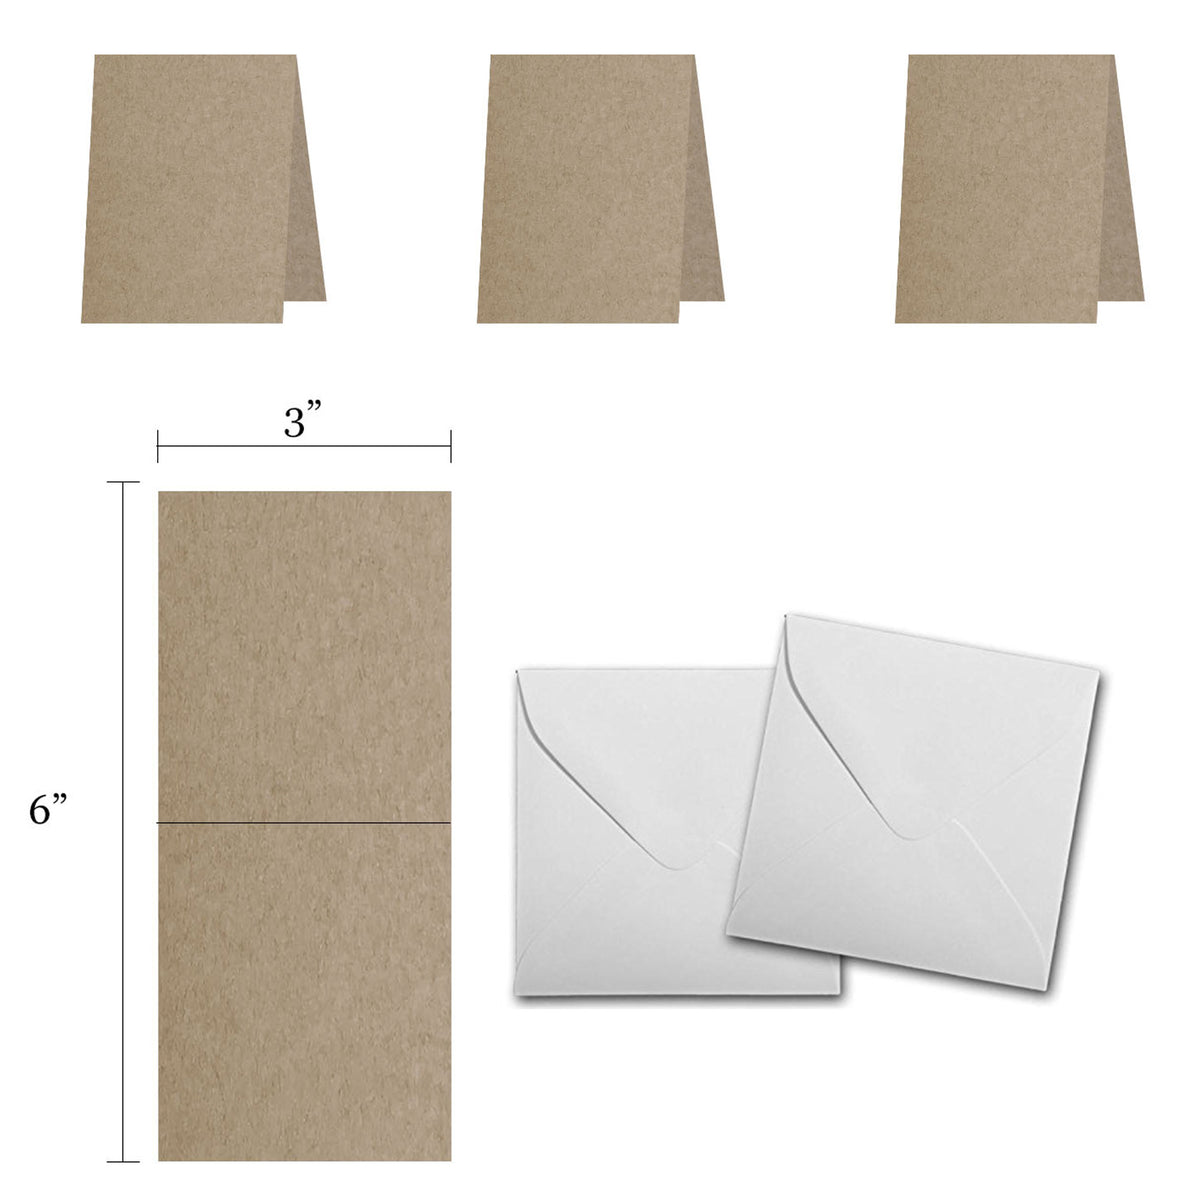 Blank Kraft 3x3 Folded Discount Card Stock and Envelopes